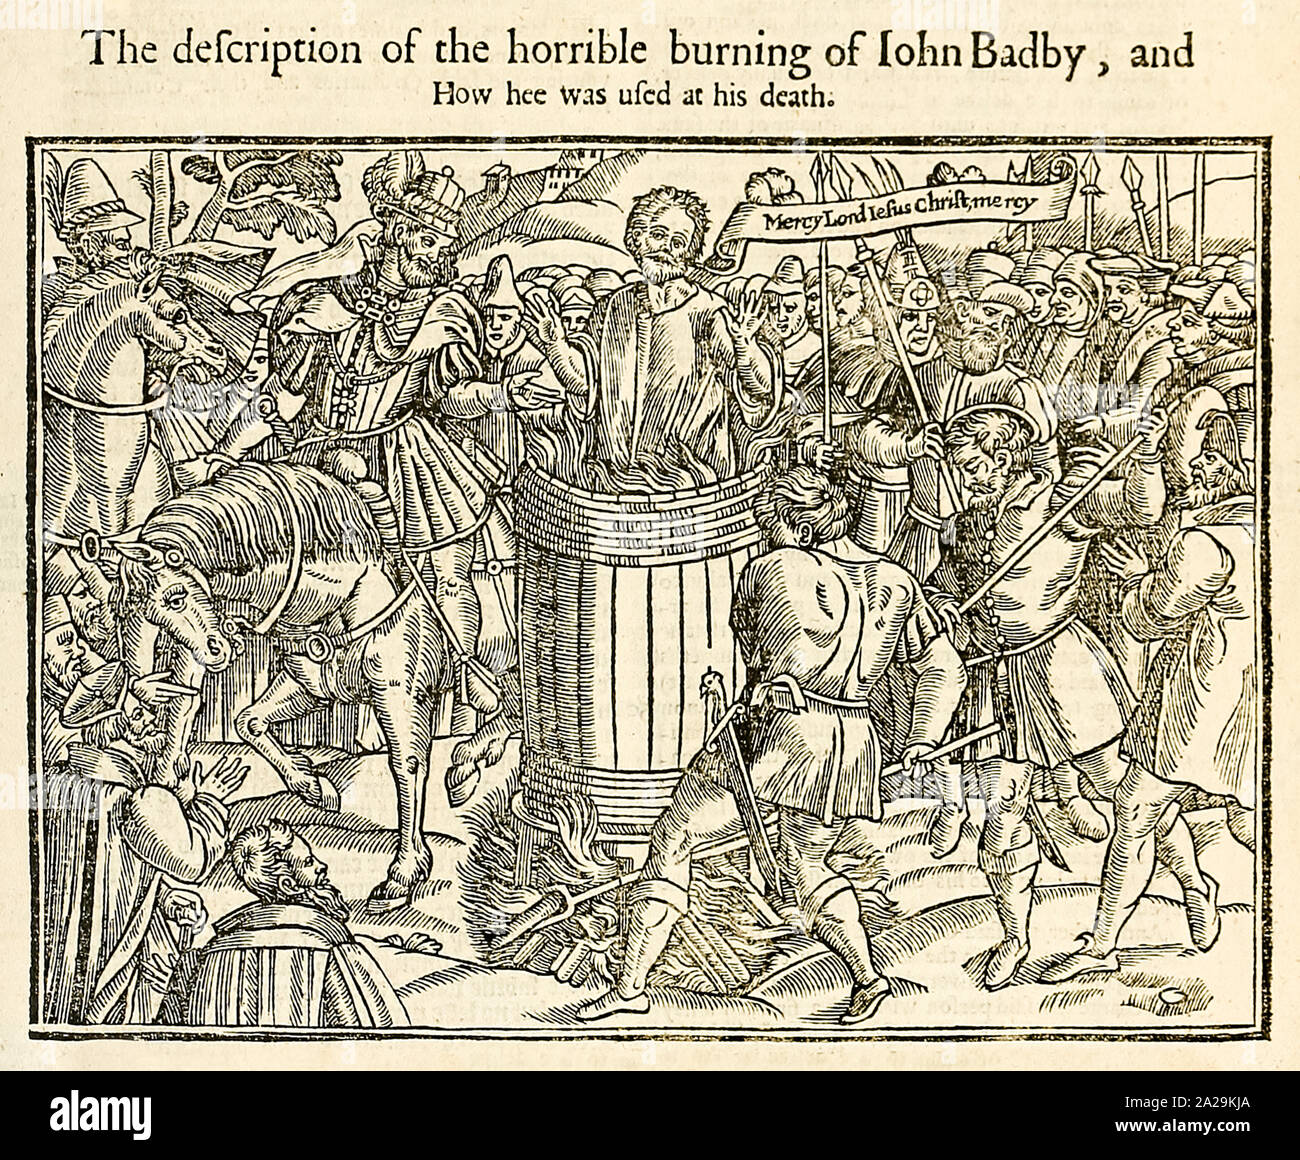 ‘The description of the horrible burning of John Badby, and how he was used at his death’ woodcut depicting his martyrdom by being burned in a barrel at St. Bartholomew's in Smithfield for heresy as a Lollard. See more information below for further details. Stock Photo